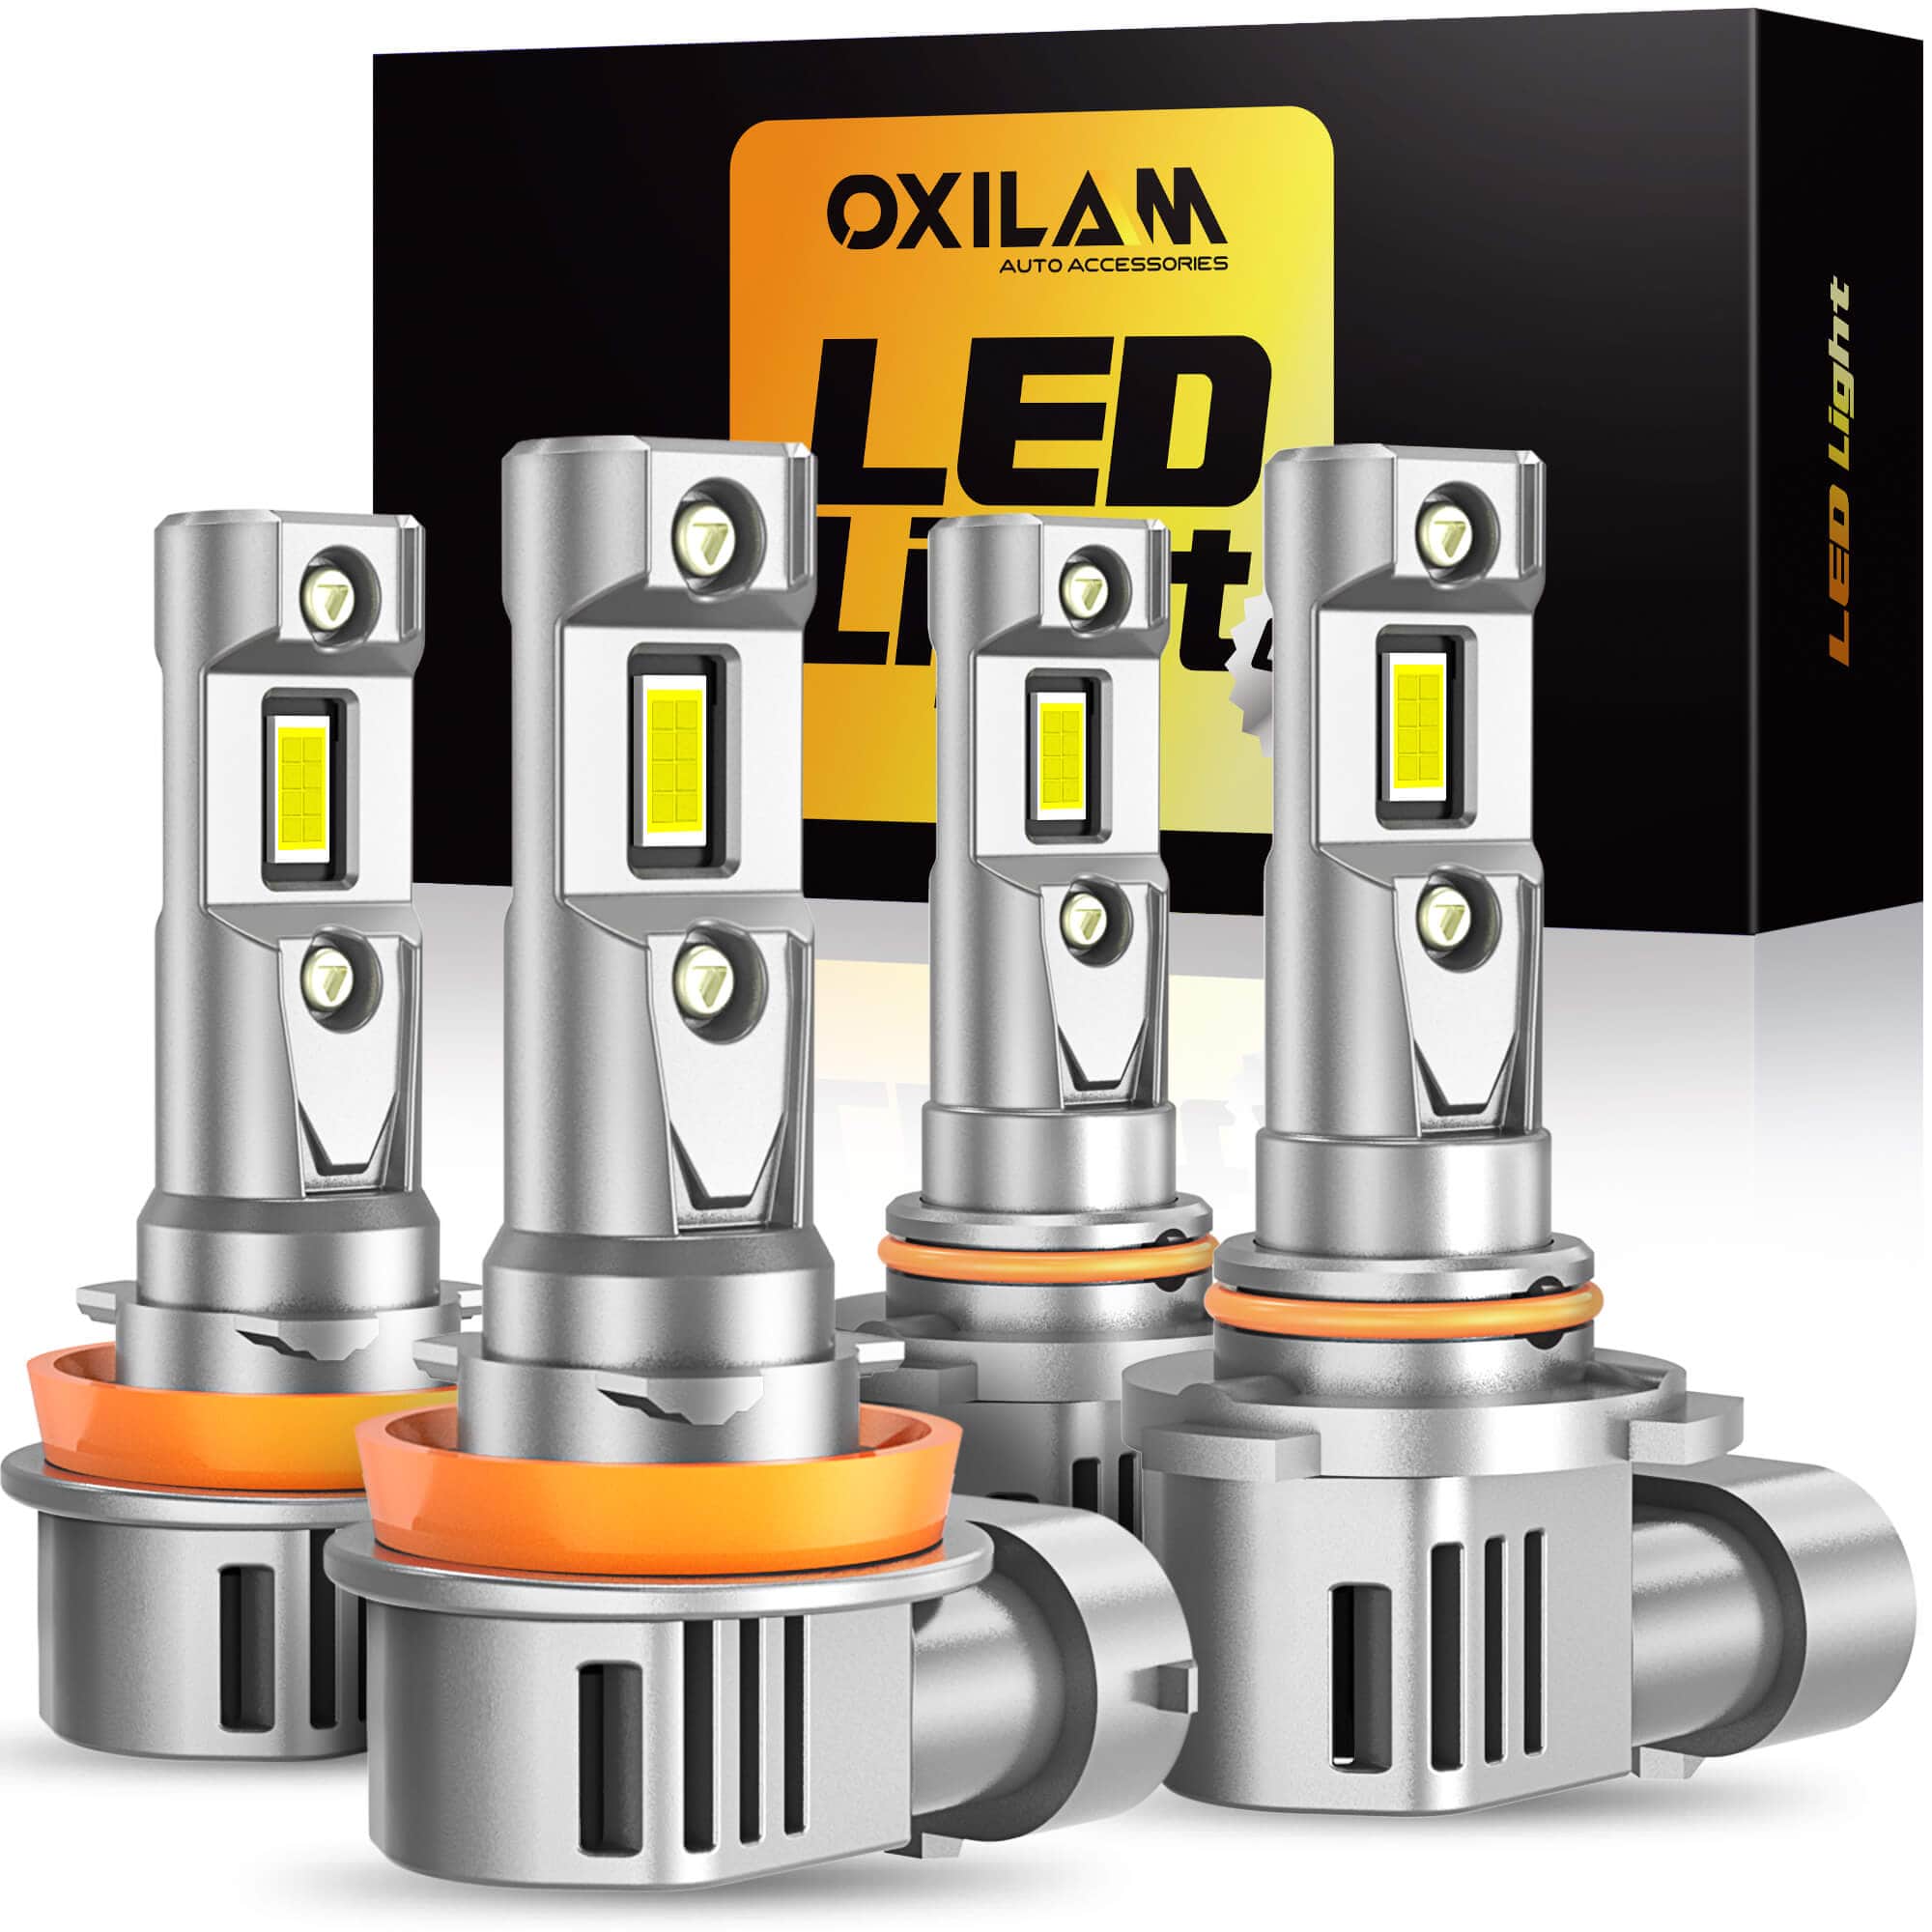 Oxilam OXILAM H11 9005 LED Light Bulbs Combo, 40000 Lumens 6500K, 1:1 Size DRL Fog Light Halogen Replacement, Pack of 4